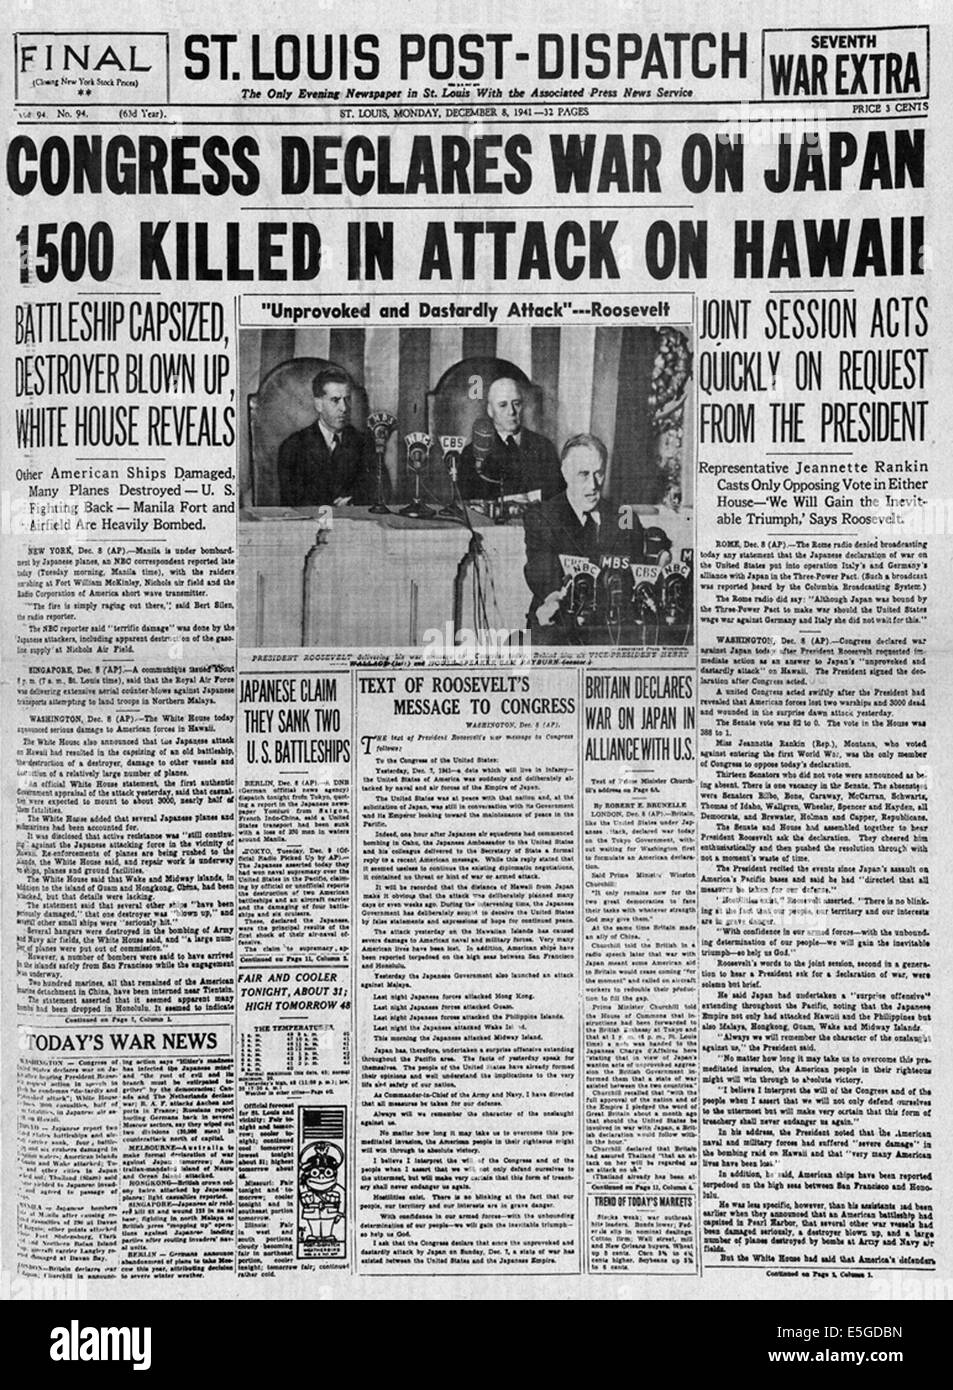 1941 St. Louis Post-Dispatch front page reporting Japanese attack Stock Photo, Royalty Free ...